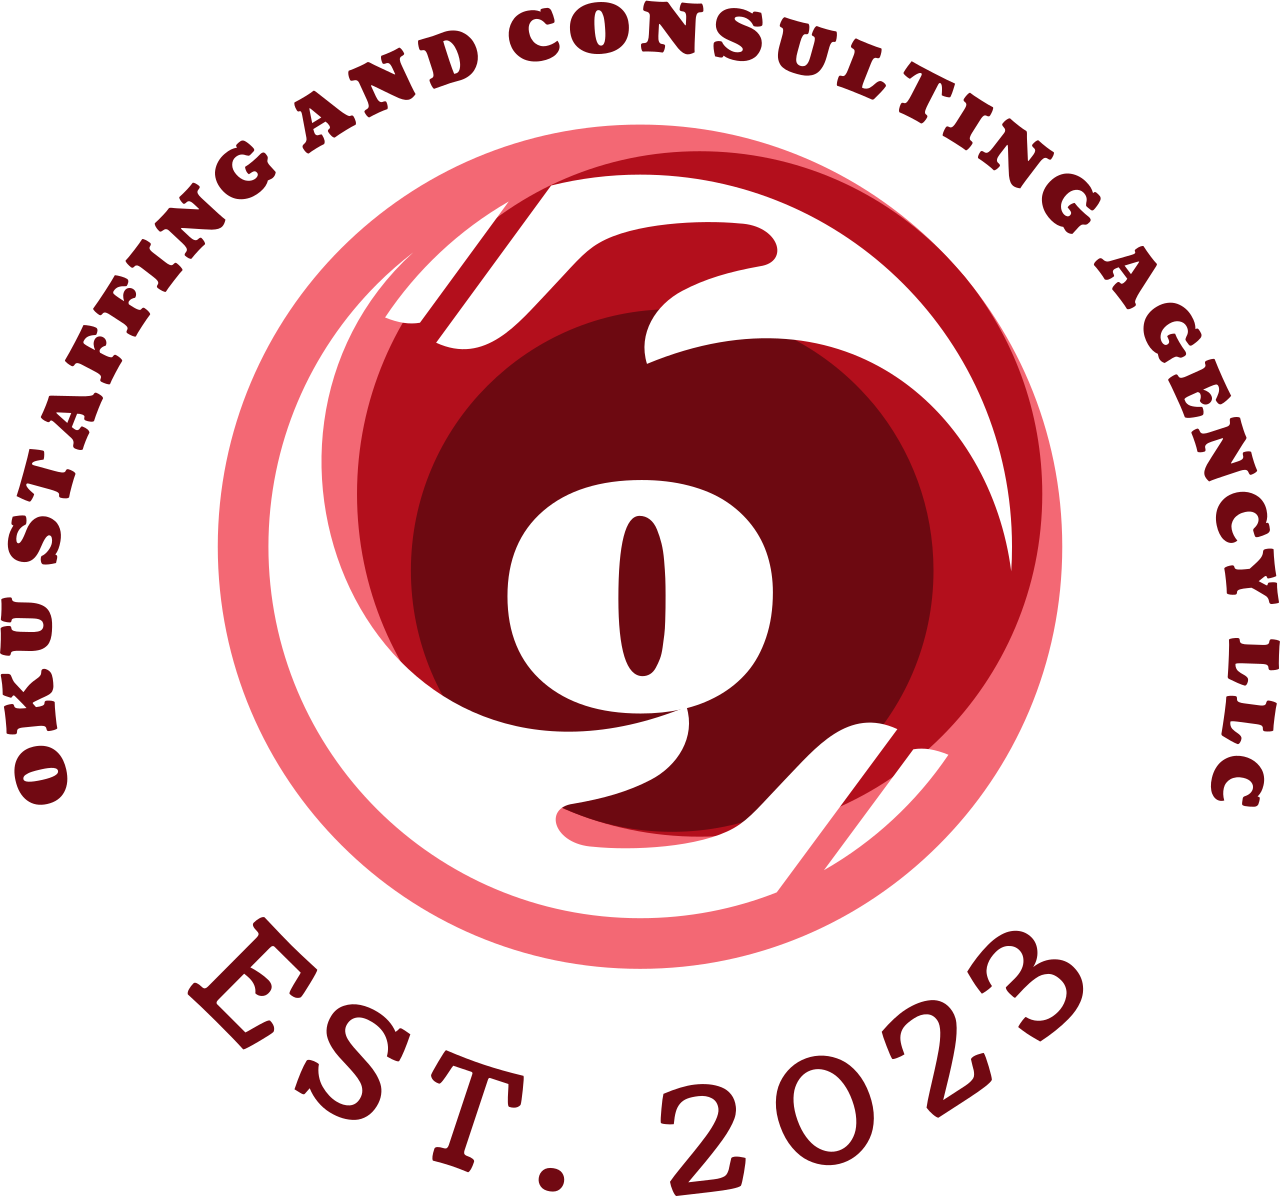 OKU STAFFING AND CONSULTING AGENCY LLC's logo